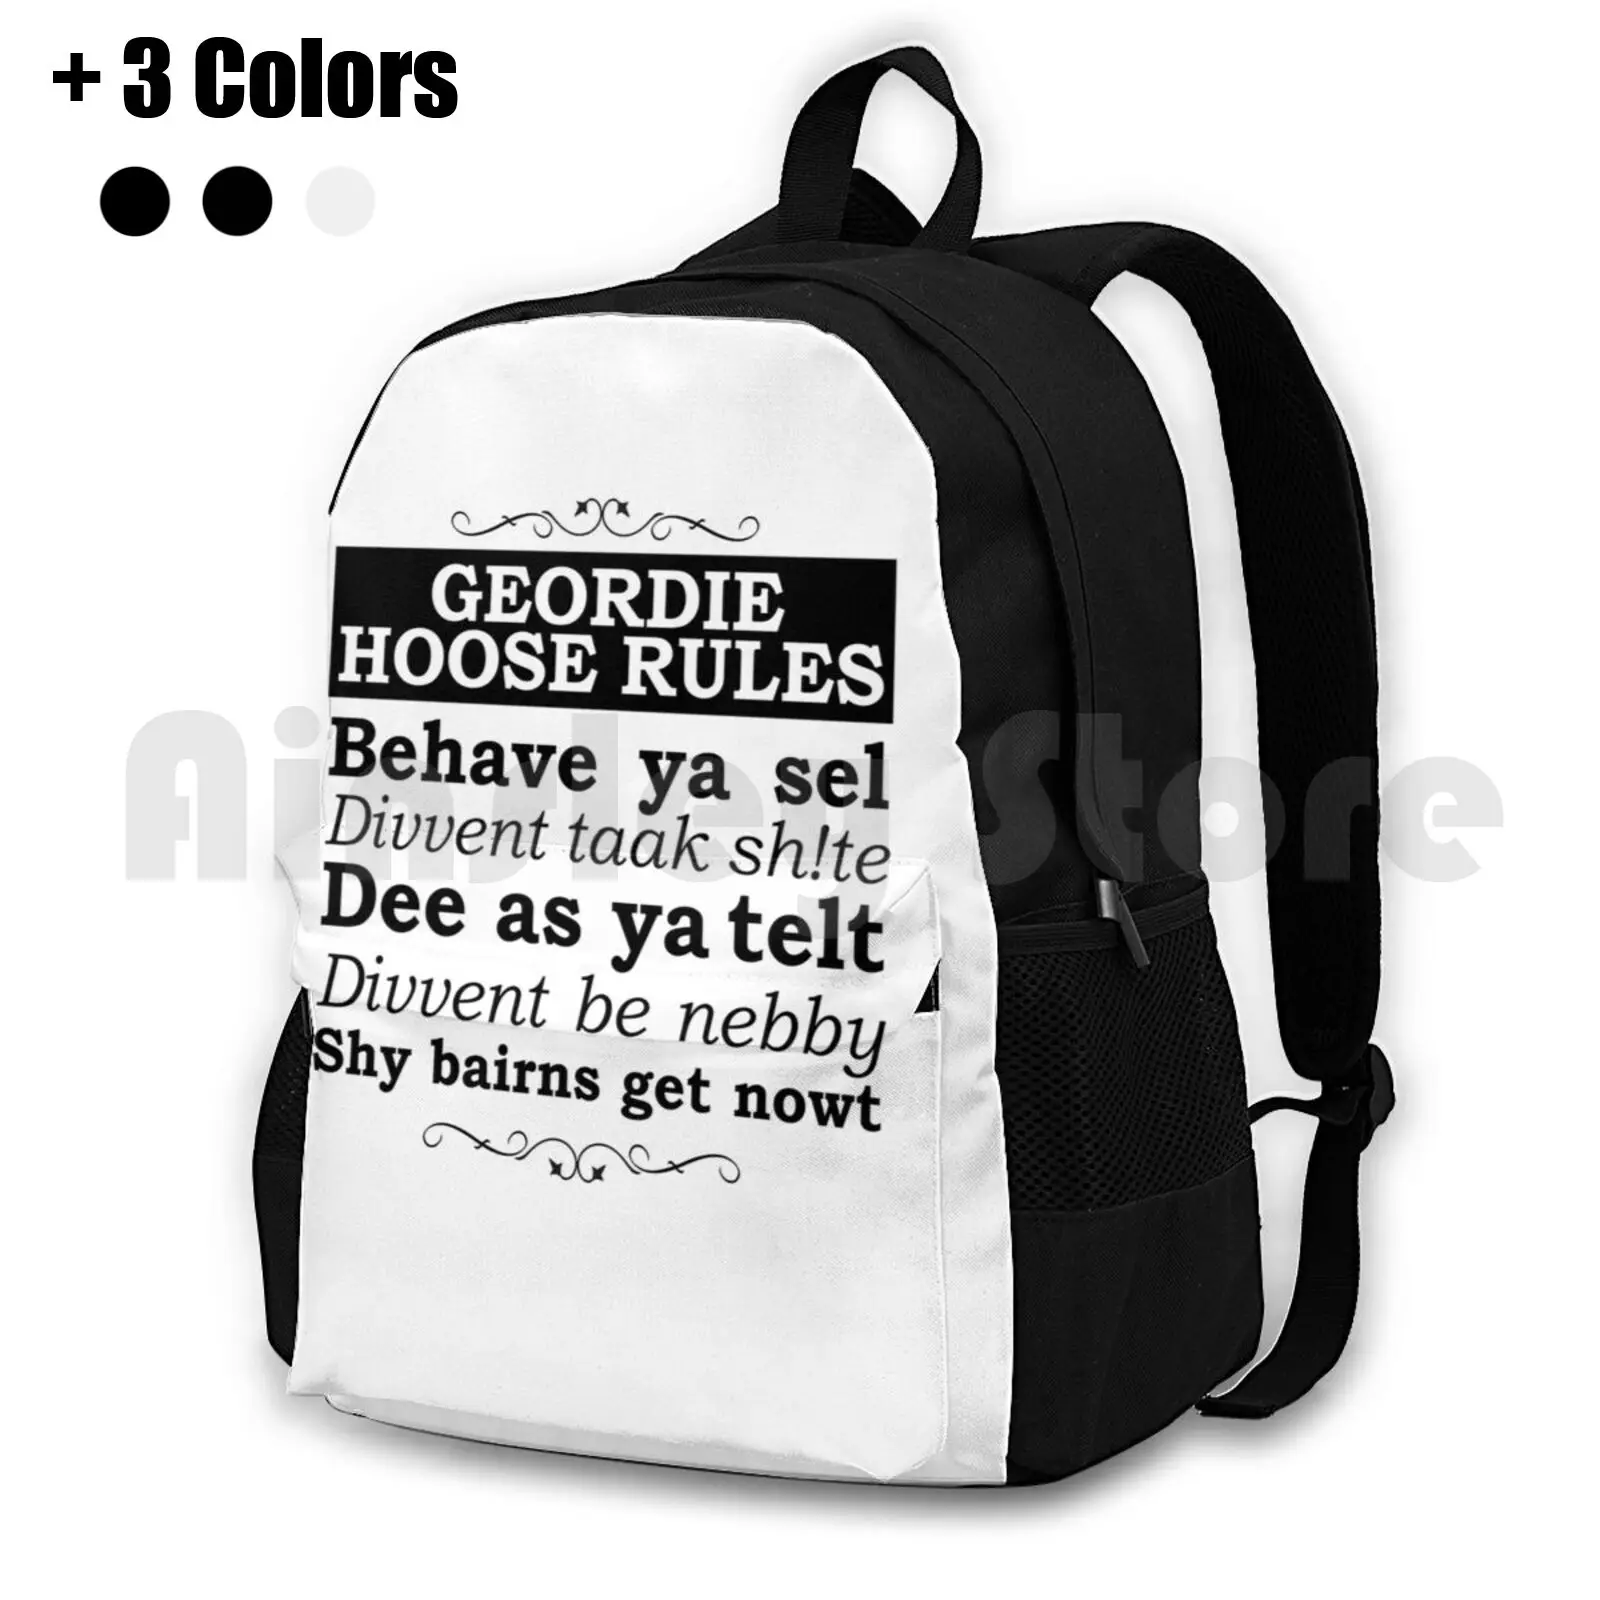 

Geordie House Rules Outdoor Hiking Backpack Waterproof Camping Travel Geordie House Rules North East England Uk Dialect Funny